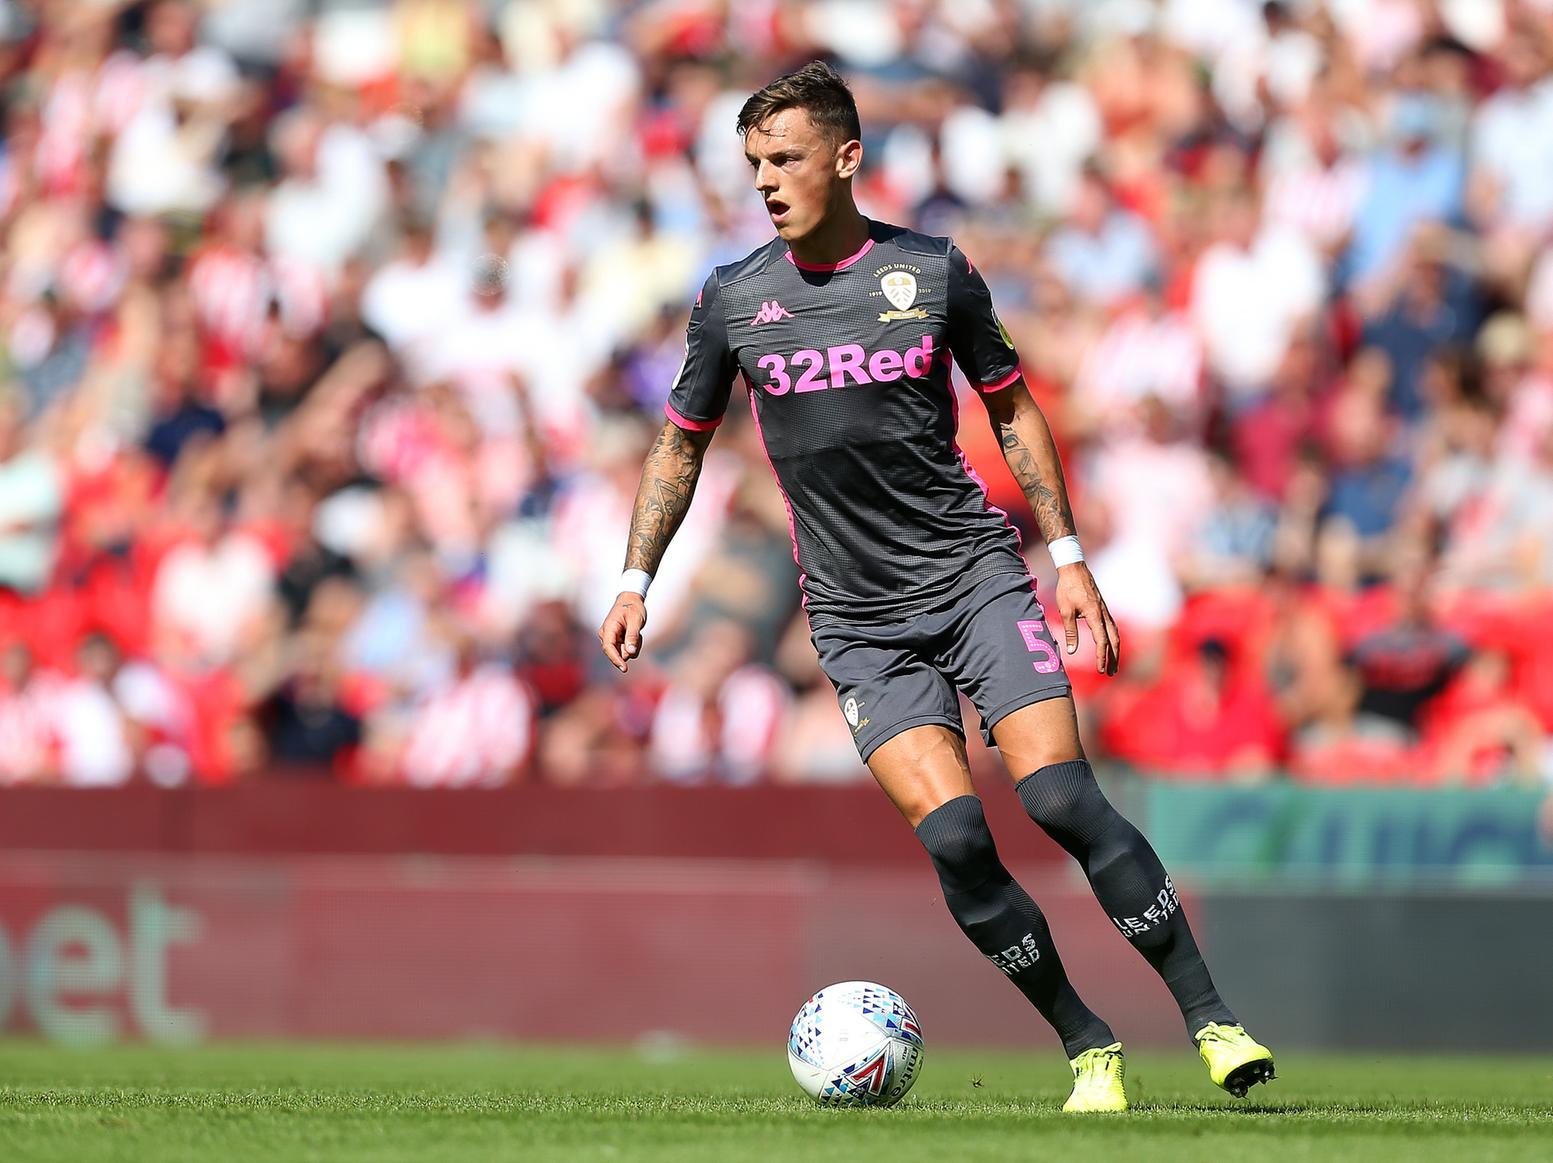 8 - Comfortable in the first half, even when Leeds looked stretched by Luton's counter attack. Claimed a brilliant assist and fought hard in the second half.